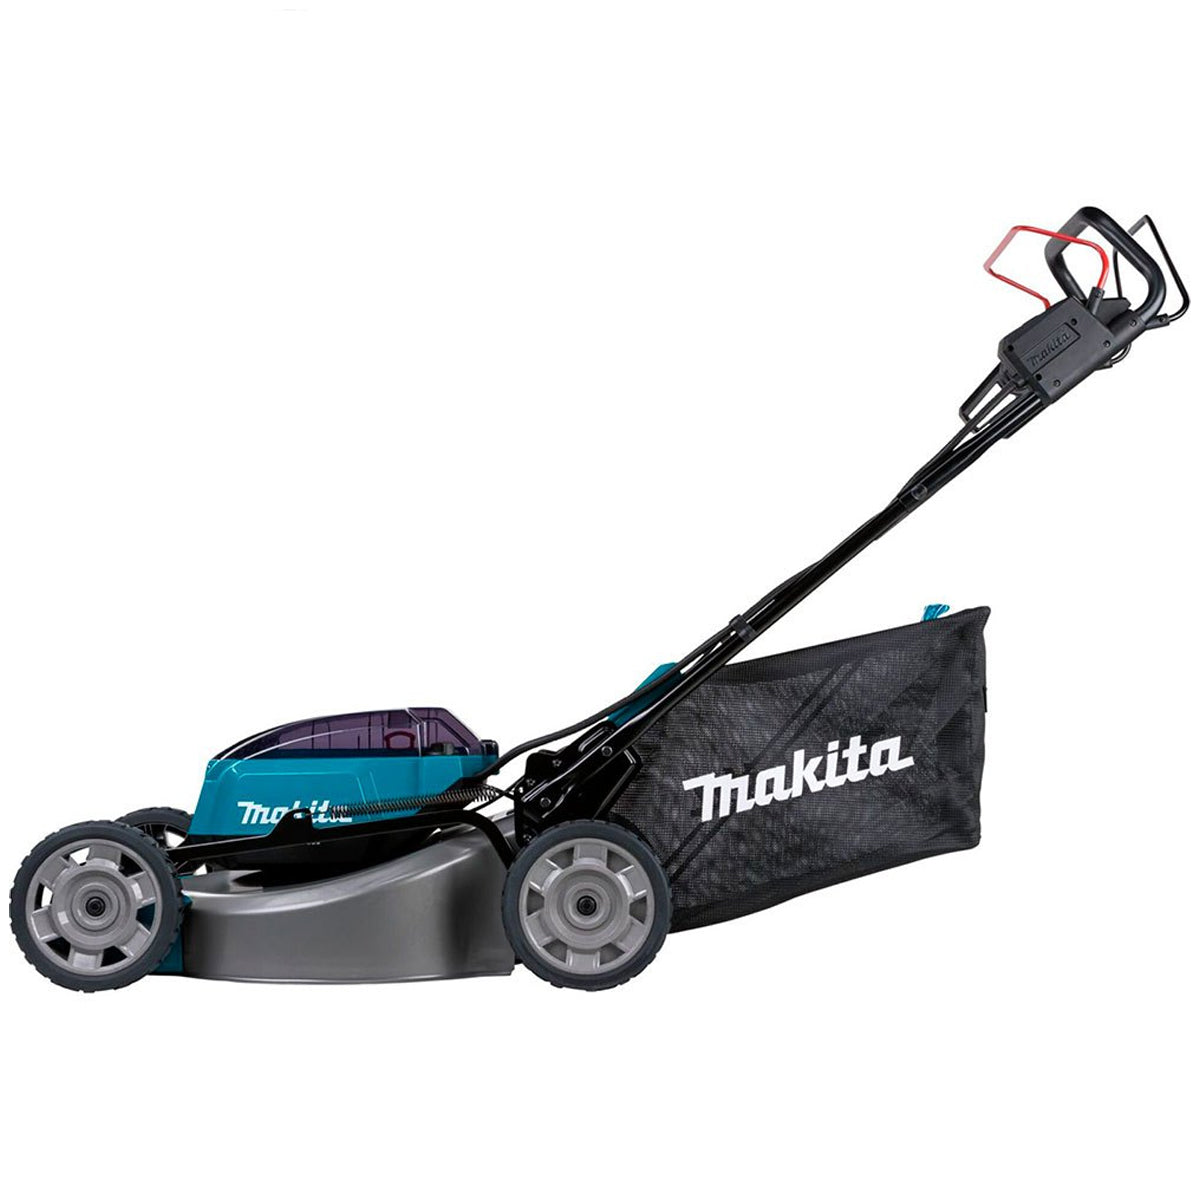 Makita DLM532PT4 36V LXT Brushless 530mm Lawn Mower With 4 x 5.0Ah Batteries & Twin Port Charger